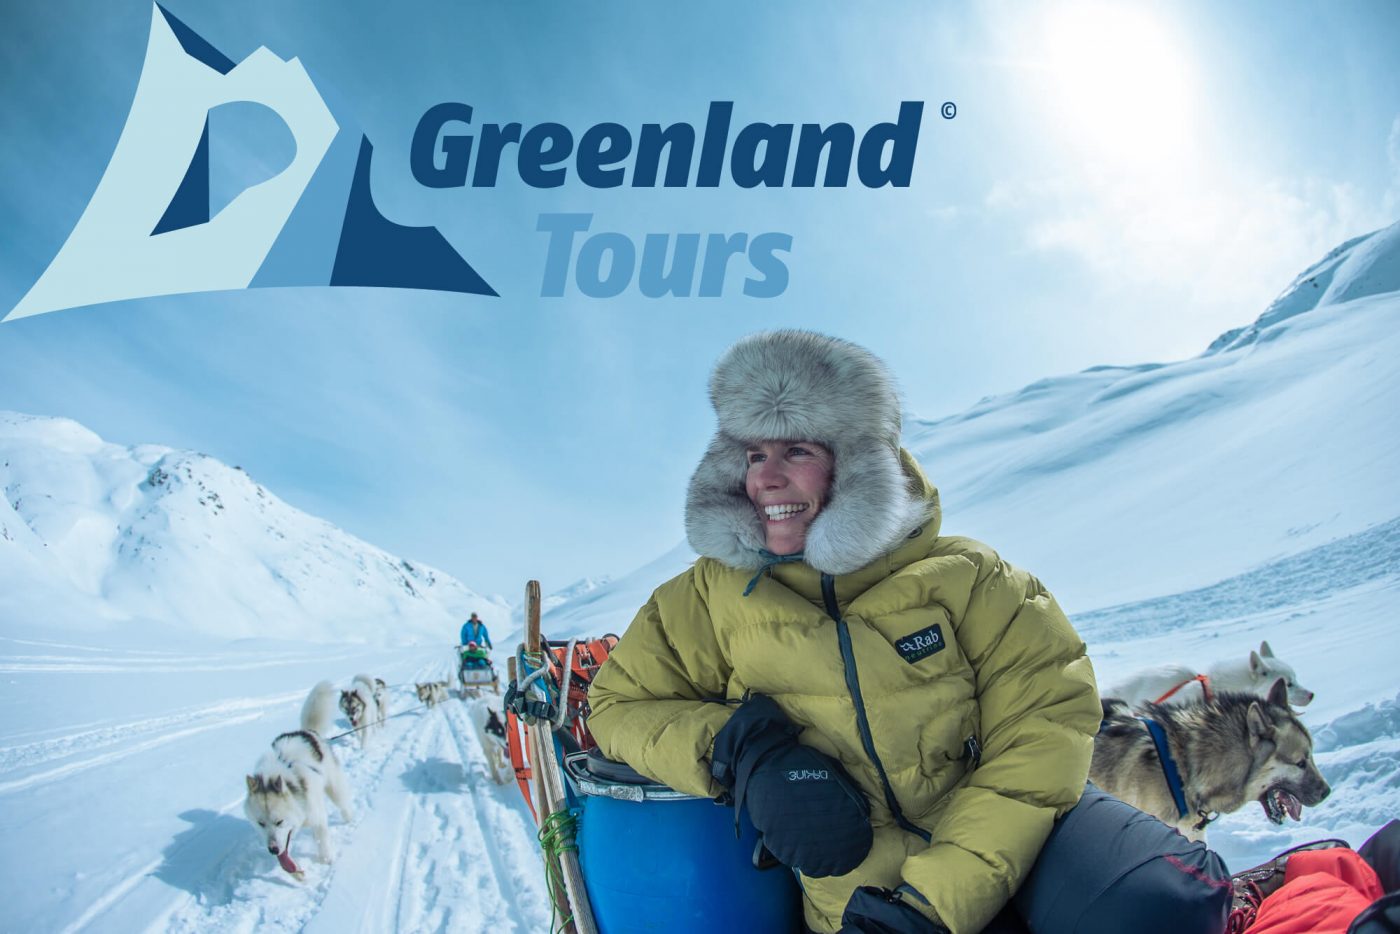 Greenland Tours: Hounds of Snow